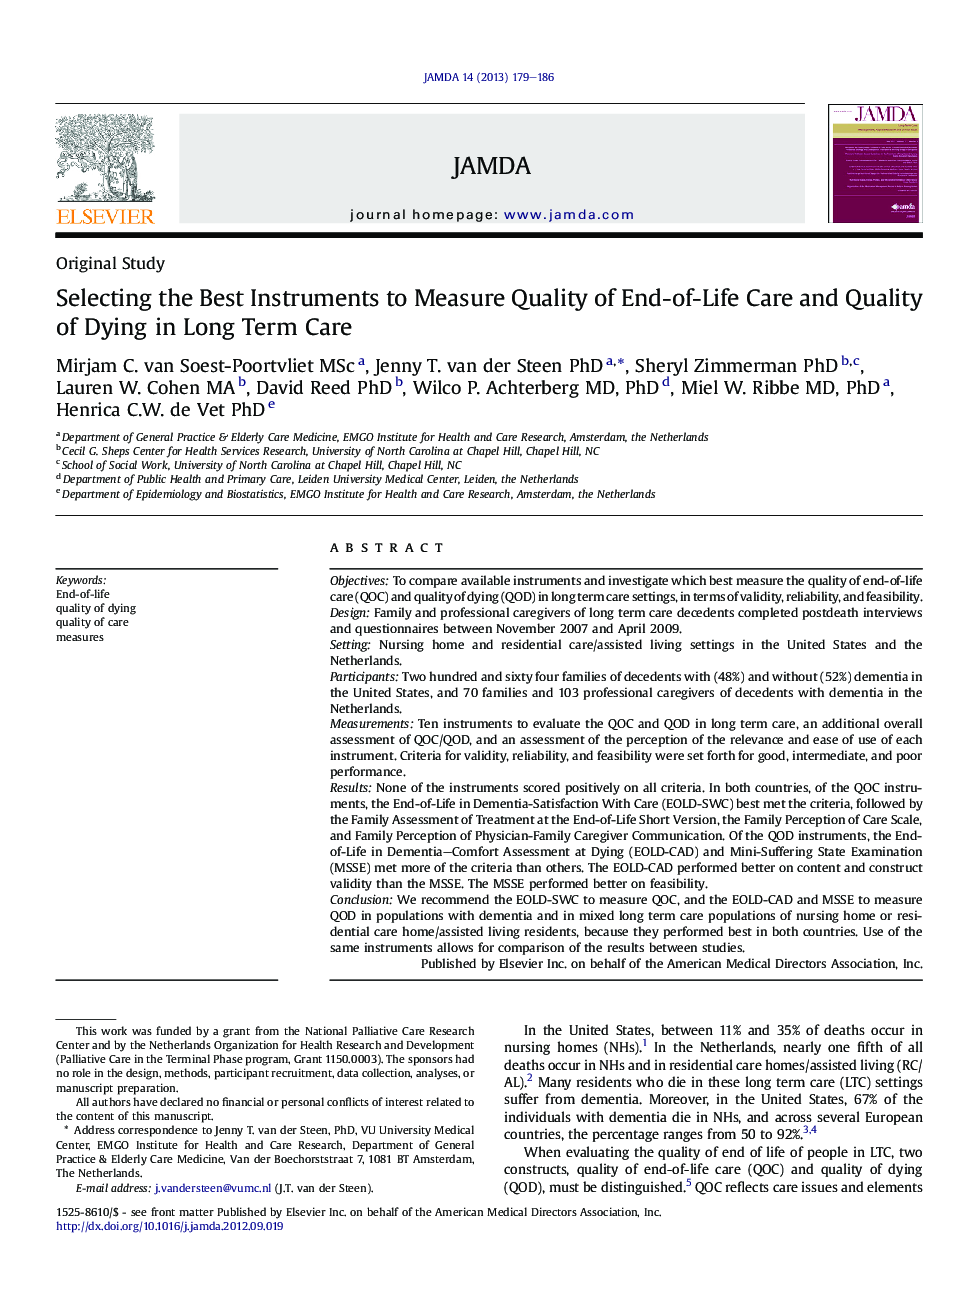 Selecting the Best Instruments to Measure Quality of End-of-Life Care and Quality of Dying in Long Term Care